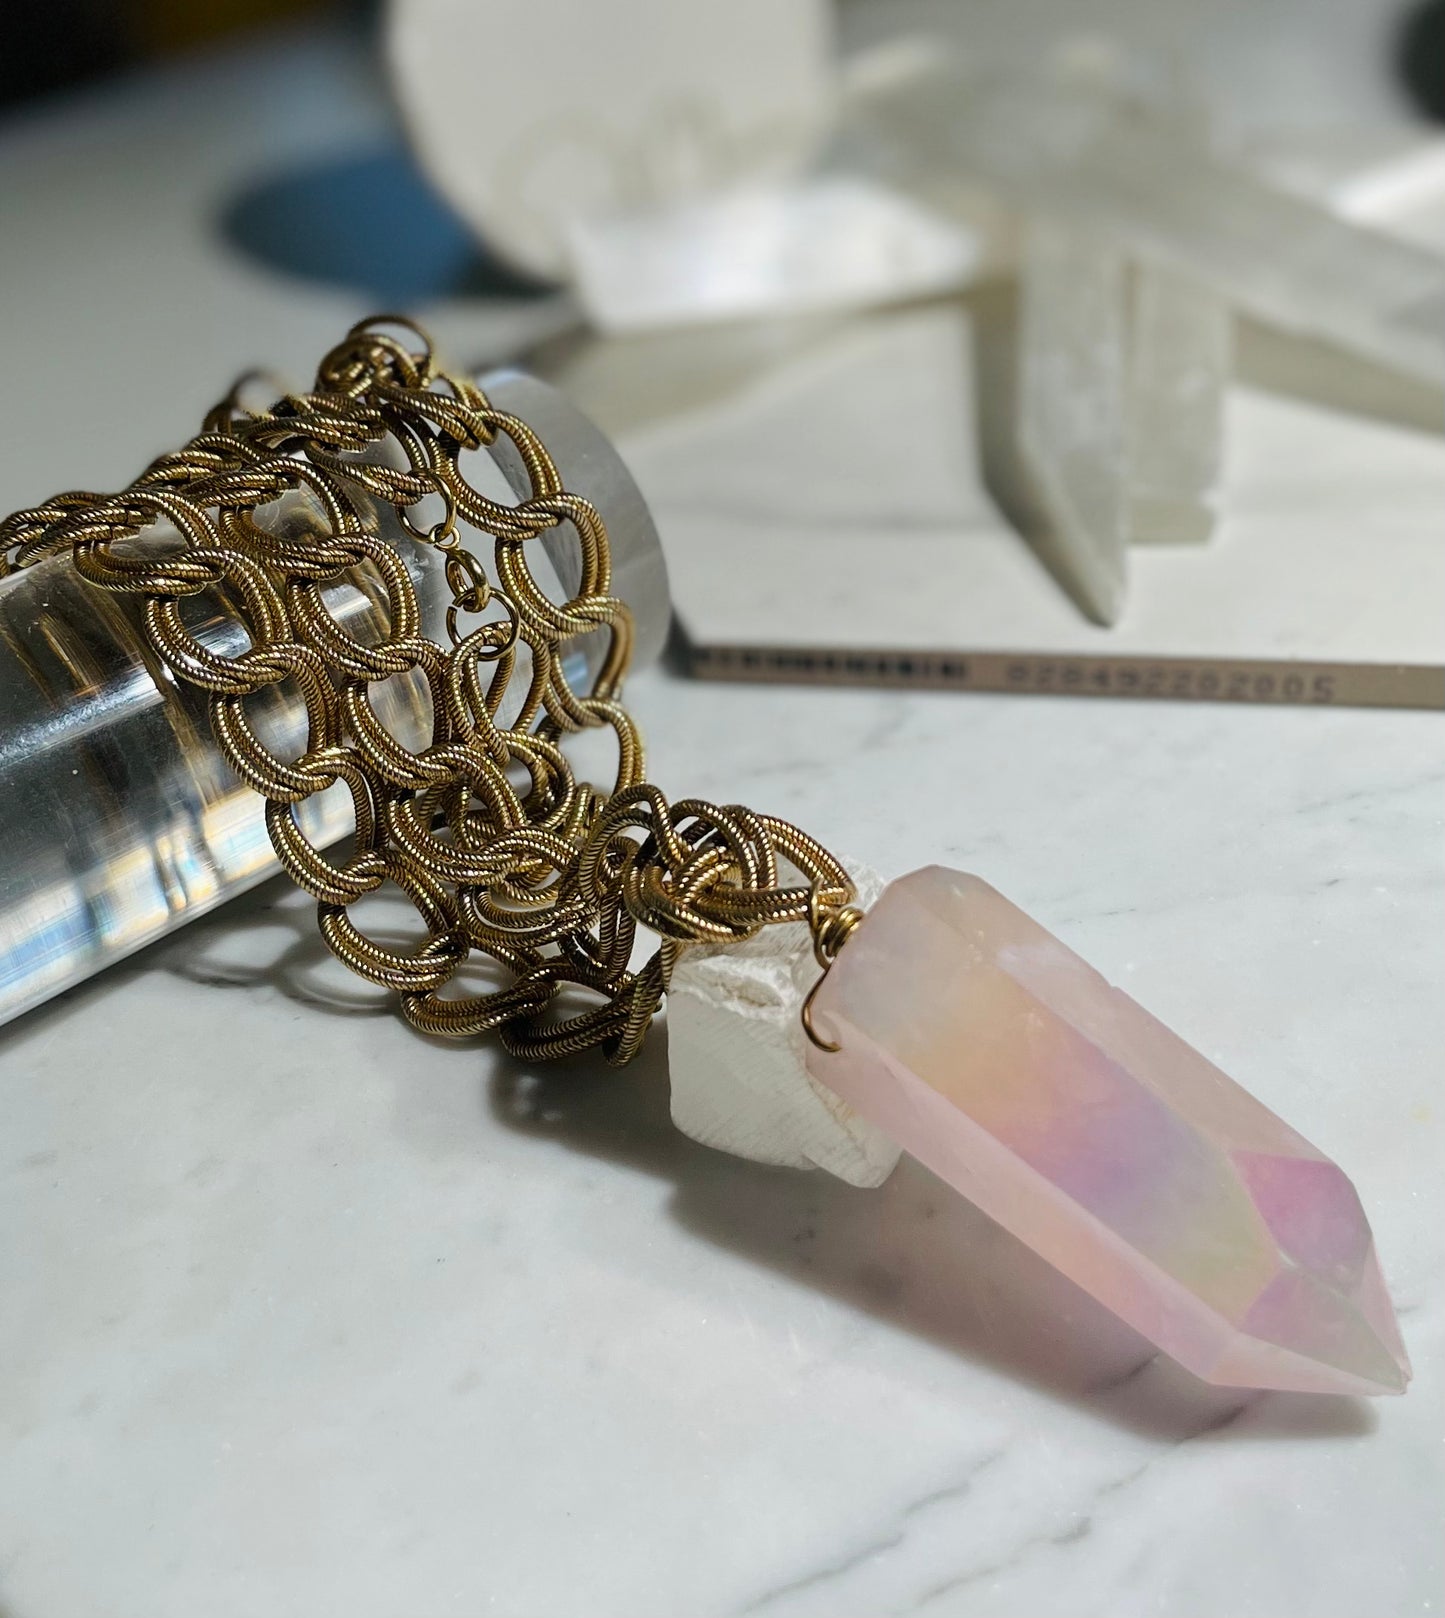 Chunky Heart Chakra Soul Chain w Aura Rose Quartz Crystal and Vintage Gold Plated Chain